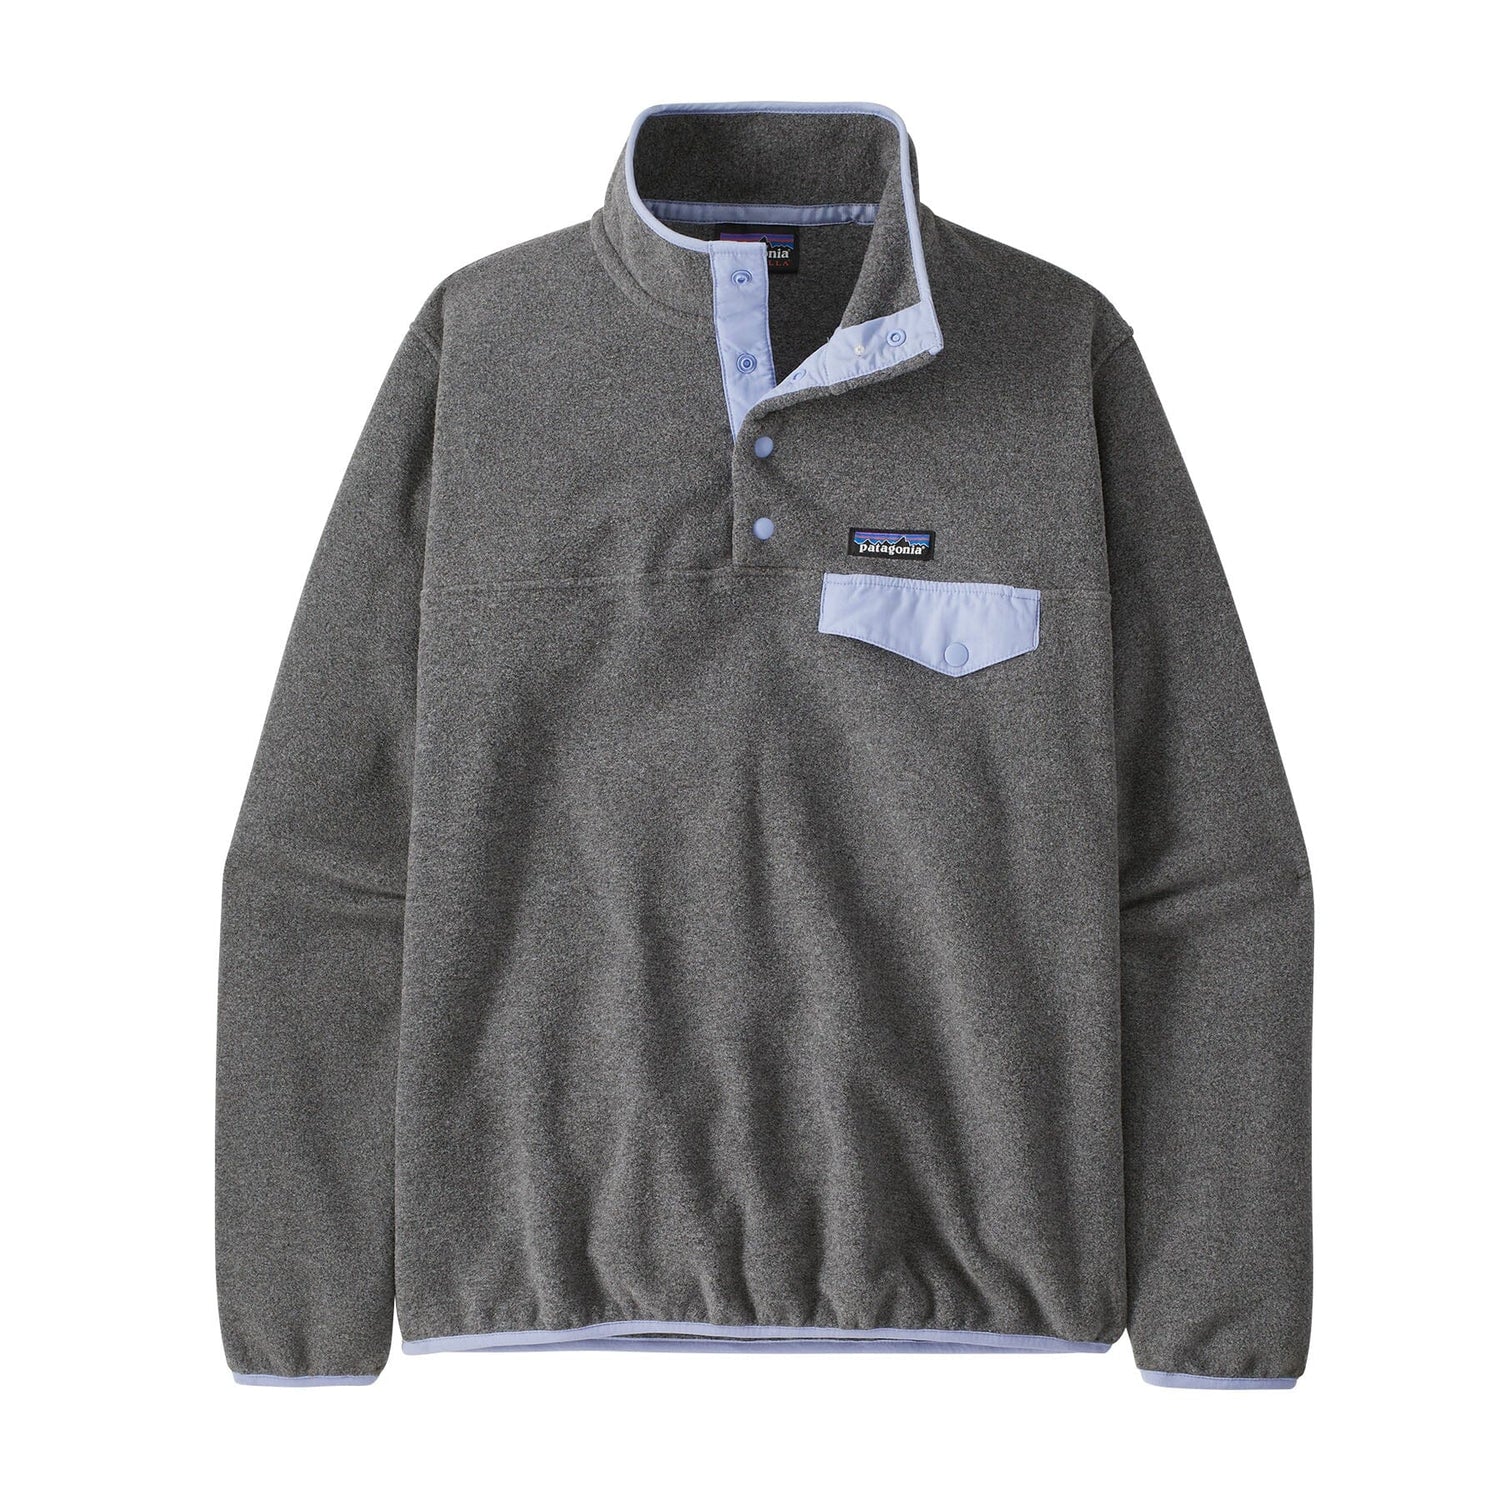 Patagonia W's Lightweight Synchilla Snap-T Fleece Pullover - Recycled Polyester Nickel w Pale Periwinkle Shirt